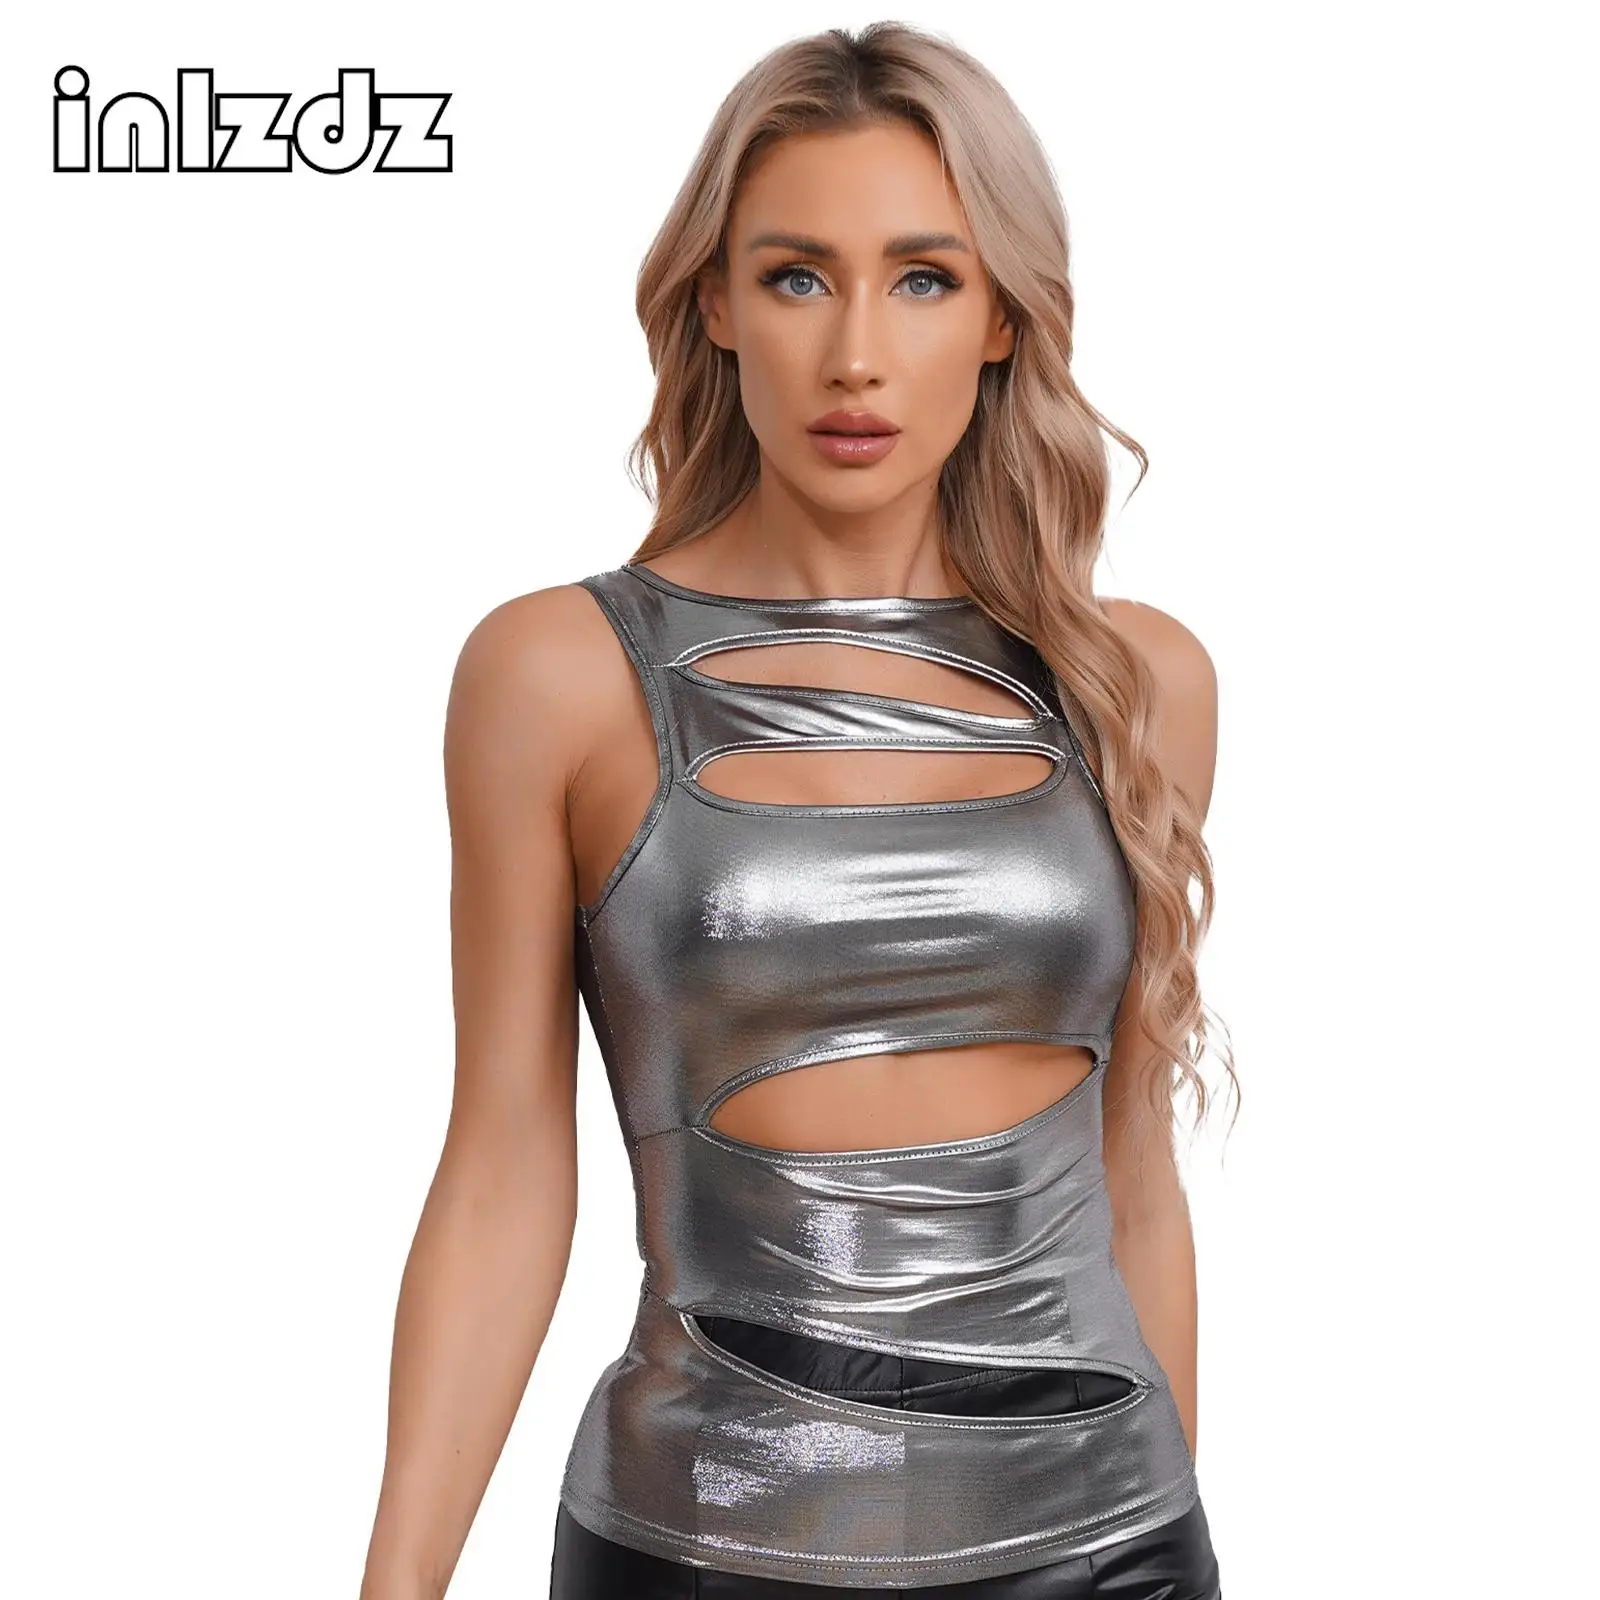 

Womens Charming Metallic Shiny Crop Top Halter Sleeveless Backless Slim Fit Tank Top Camisole for Cub Bar Nightout